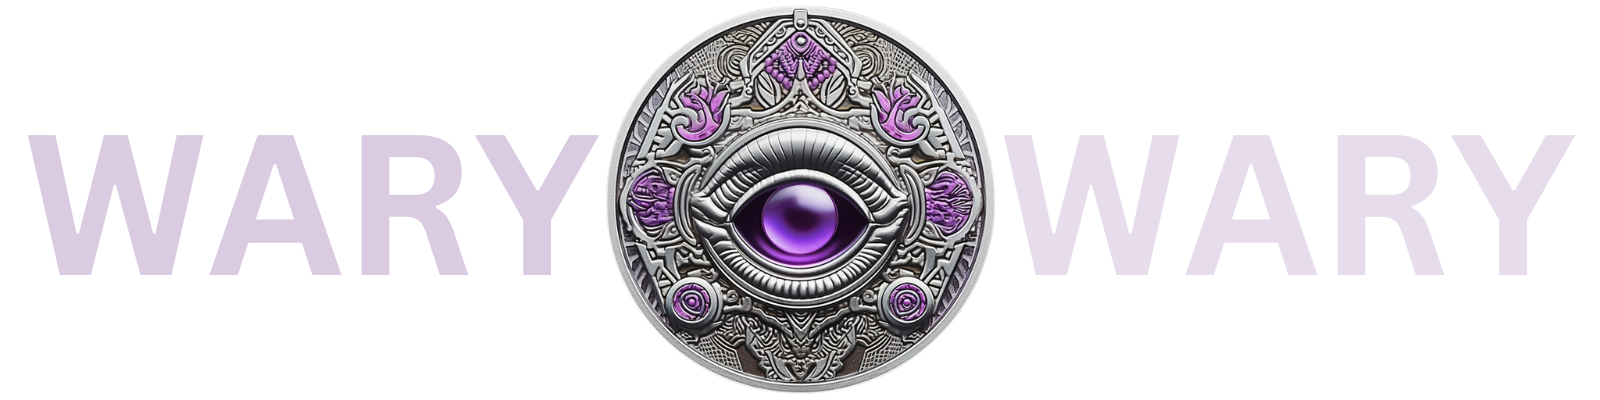 Wary personality style logo - a silver medallion with purple eye